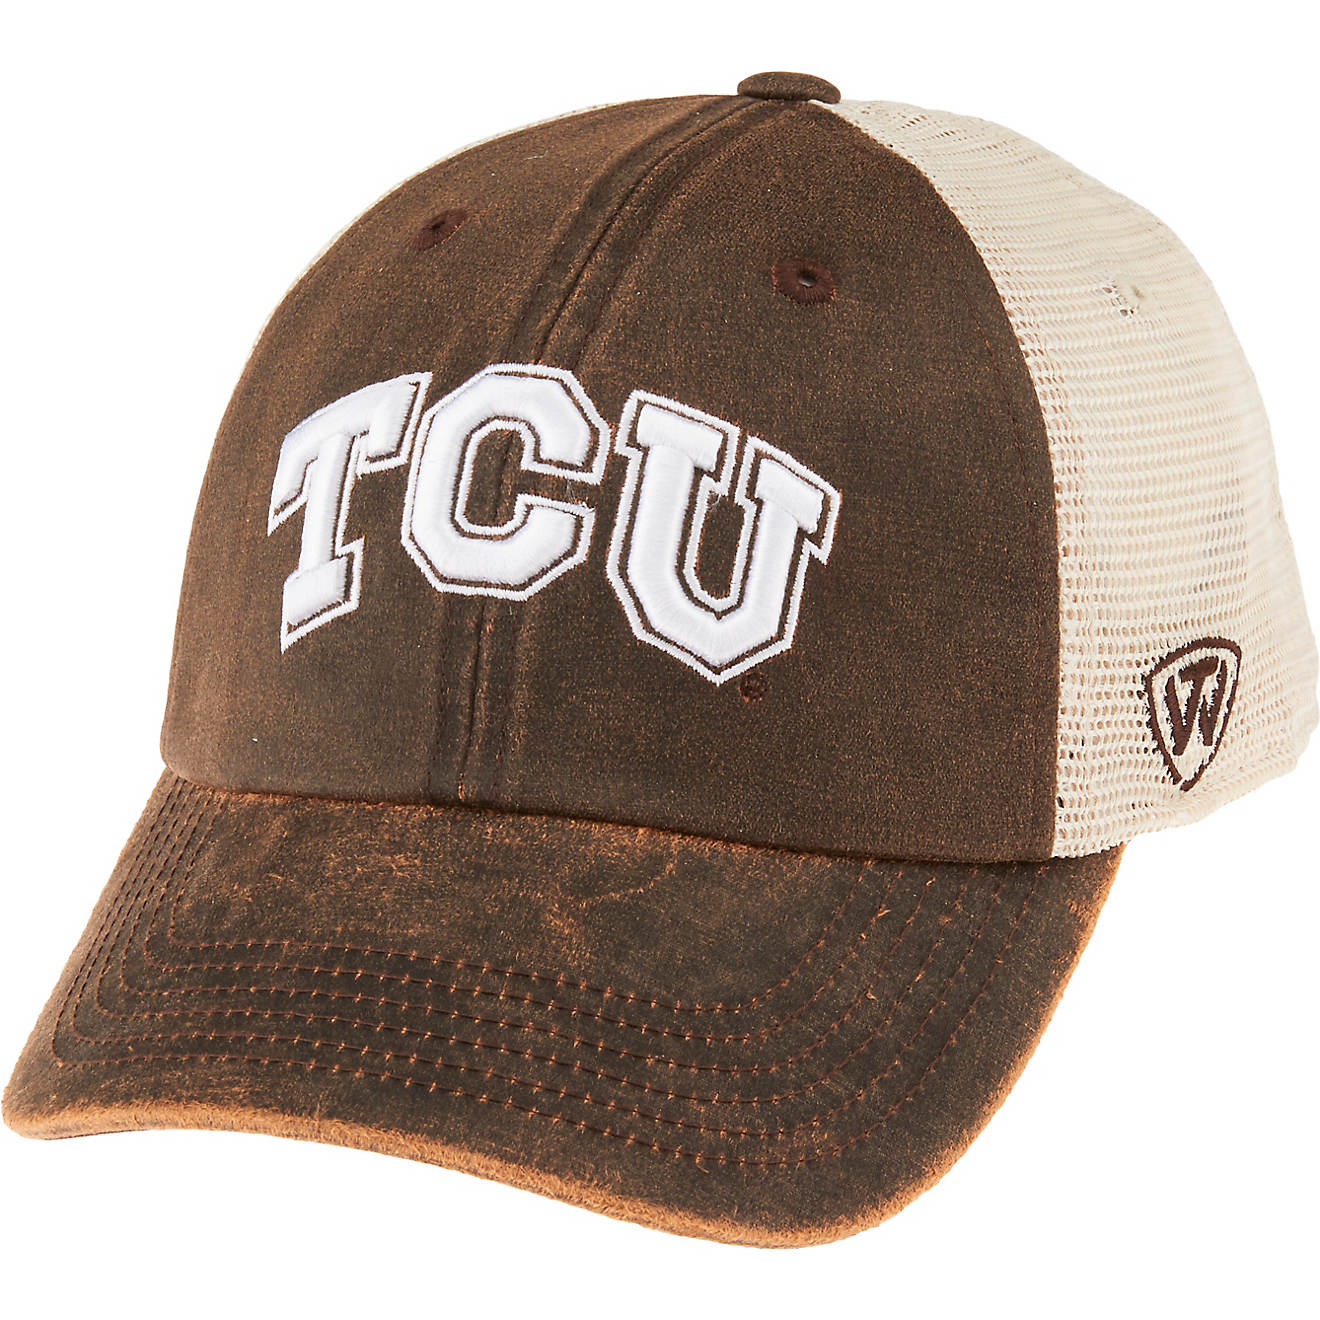 Top of the World Adults' Texas Christian University ScatMesh Cap                                                                 - view number 1